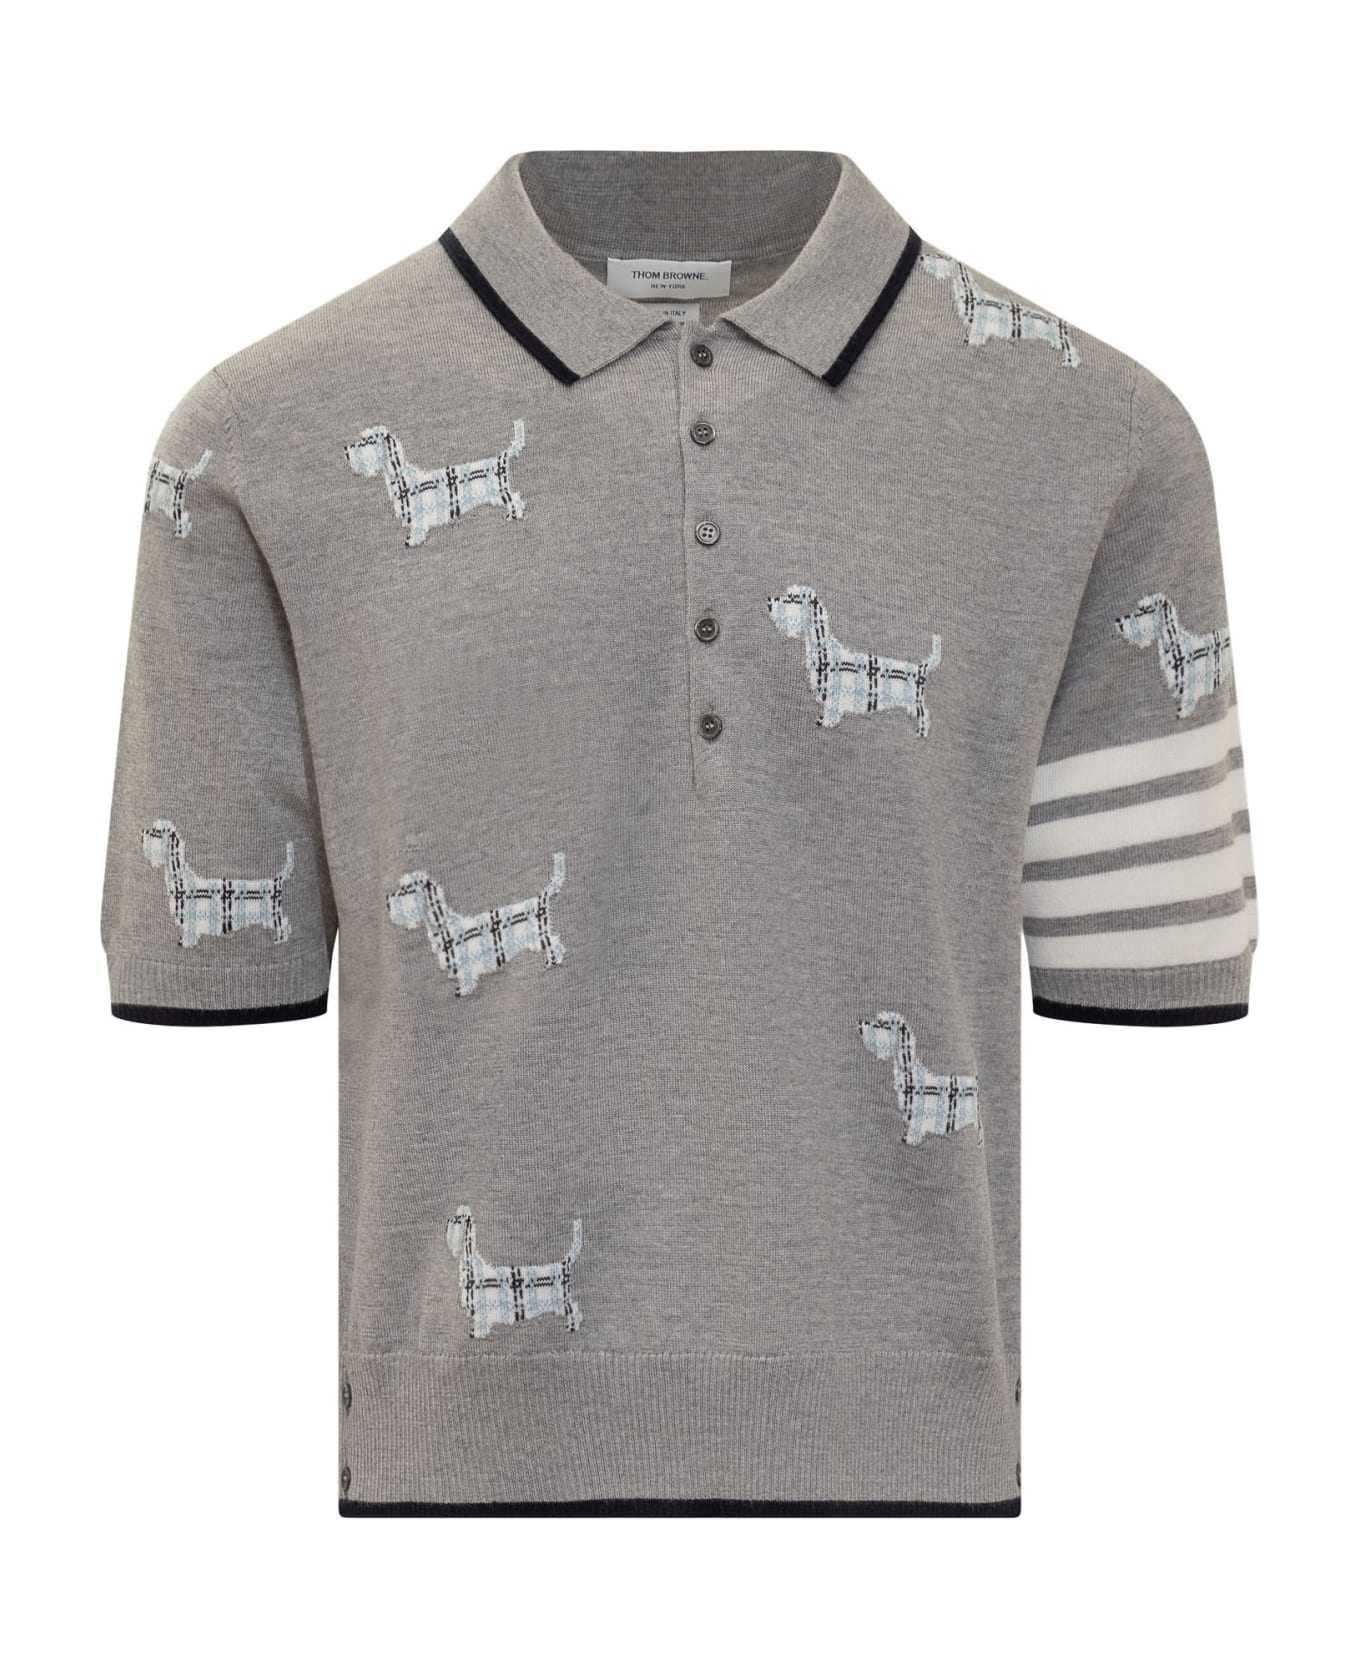 Thom Browne 'hector' Polo Shirt - LT GREY ポロシャツ